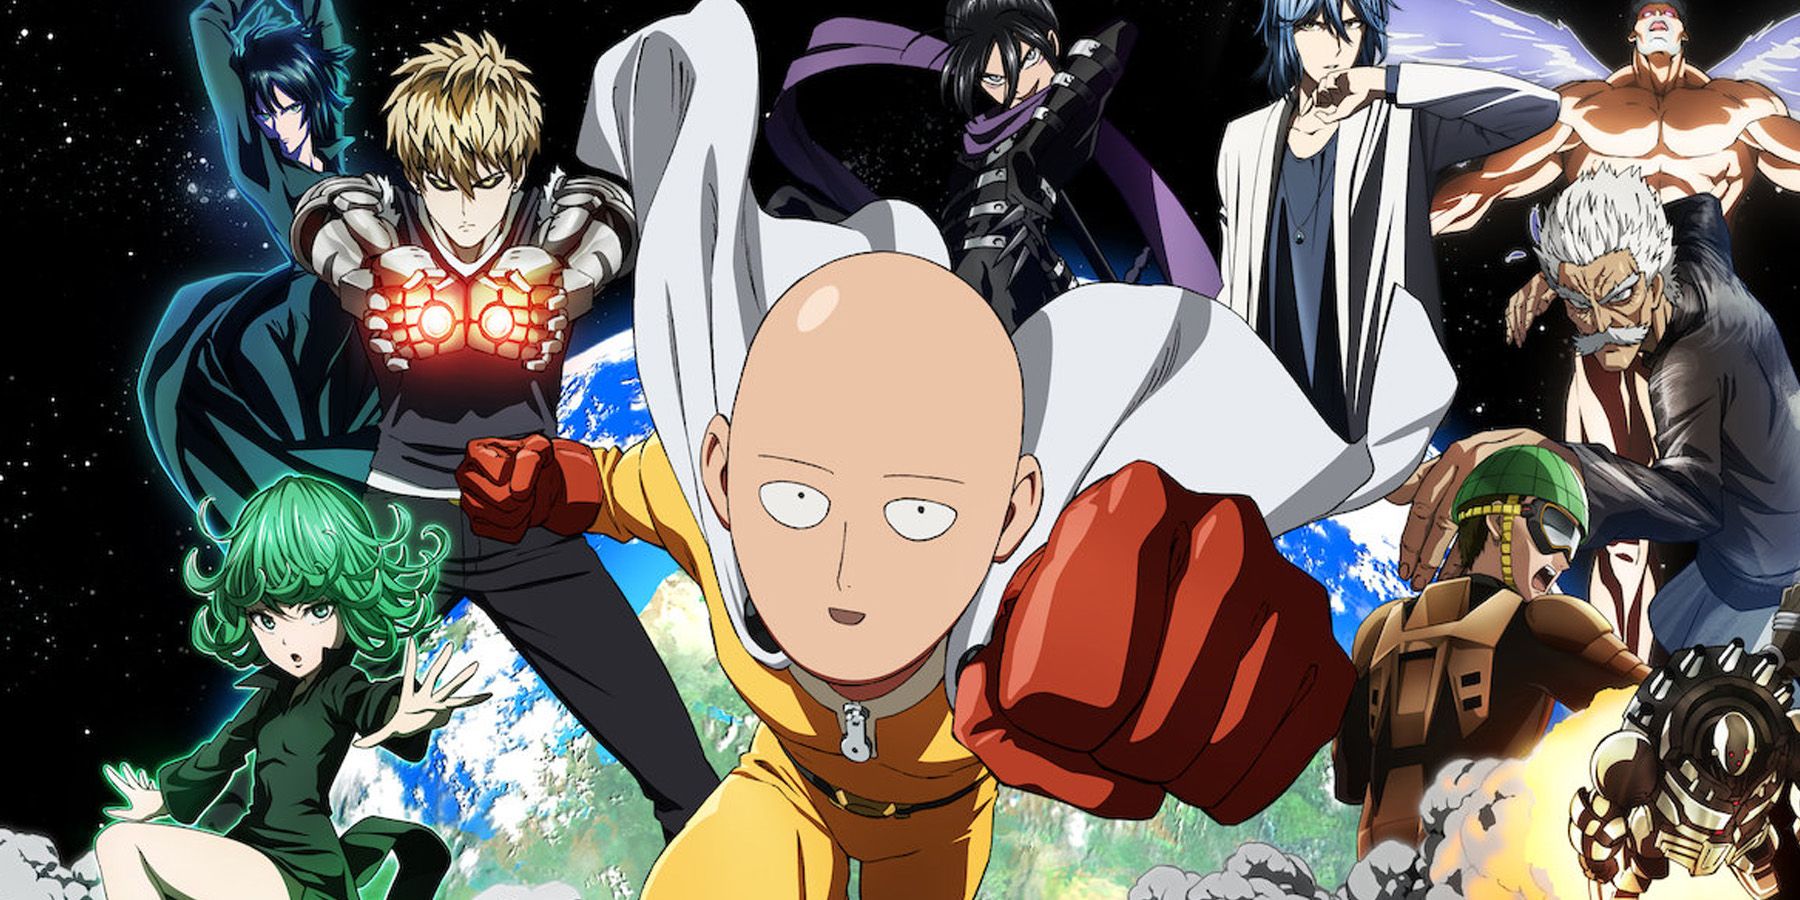 Saitama and his friends in One Punch Man